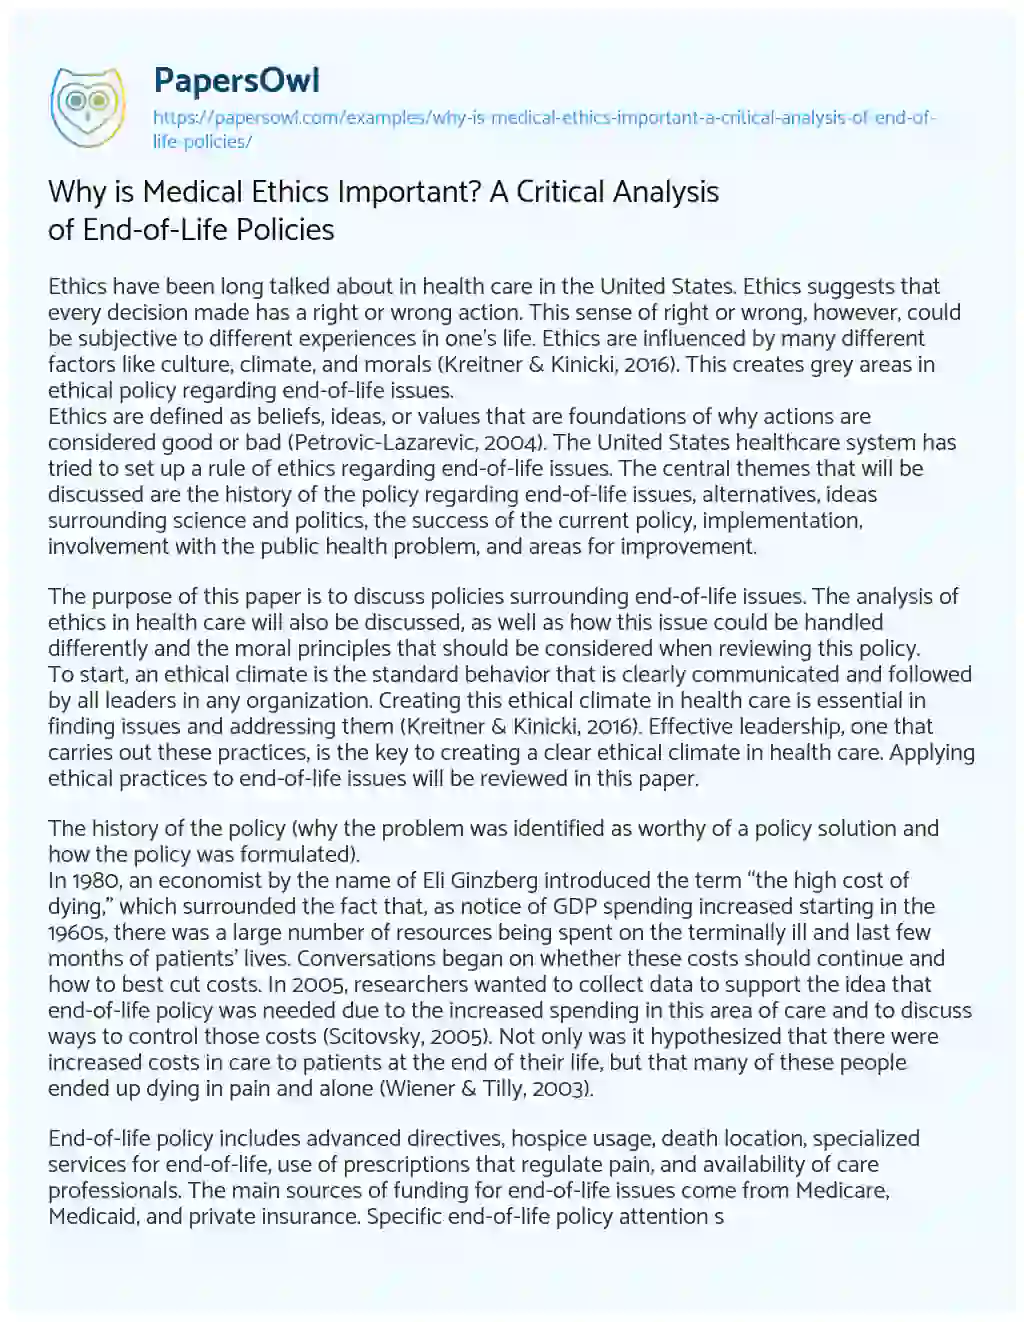 Essay on Why is Medical Ethics Important? a Critical Analysis of End-of-Life Policies